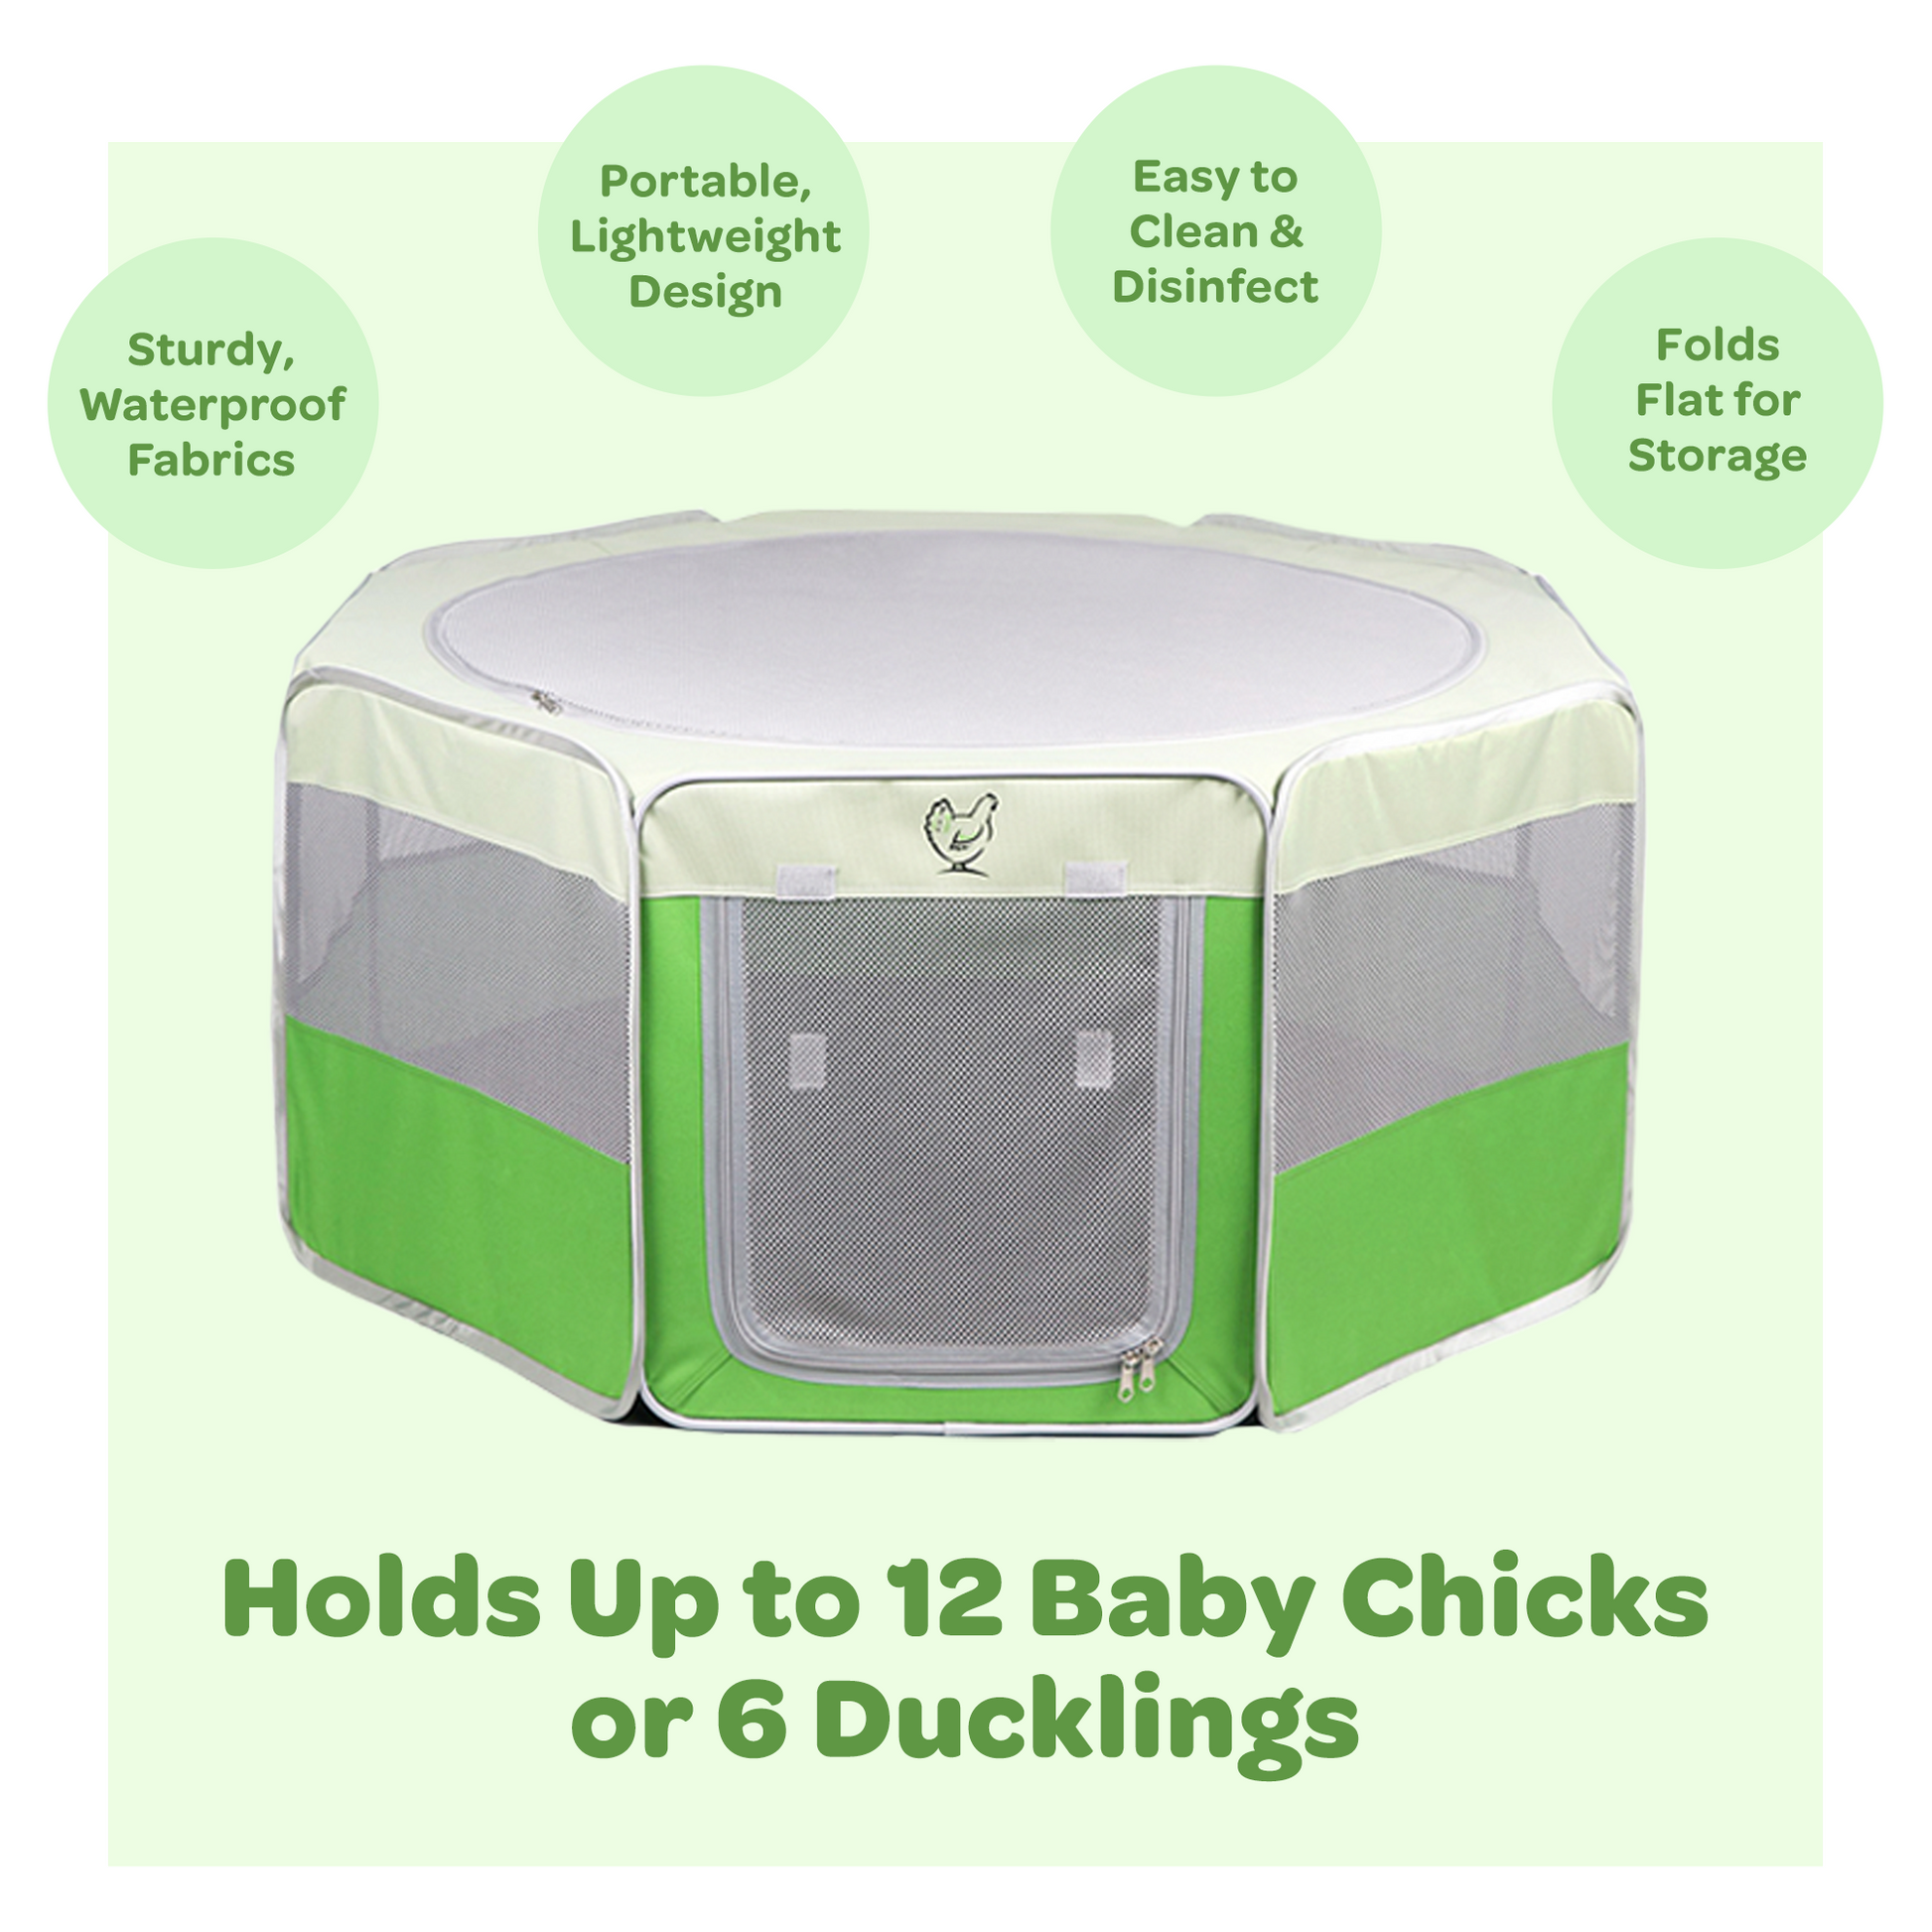 The Hen Pen Pop-up brooder holds up to 12 baby chicks or 6 ducklings. 